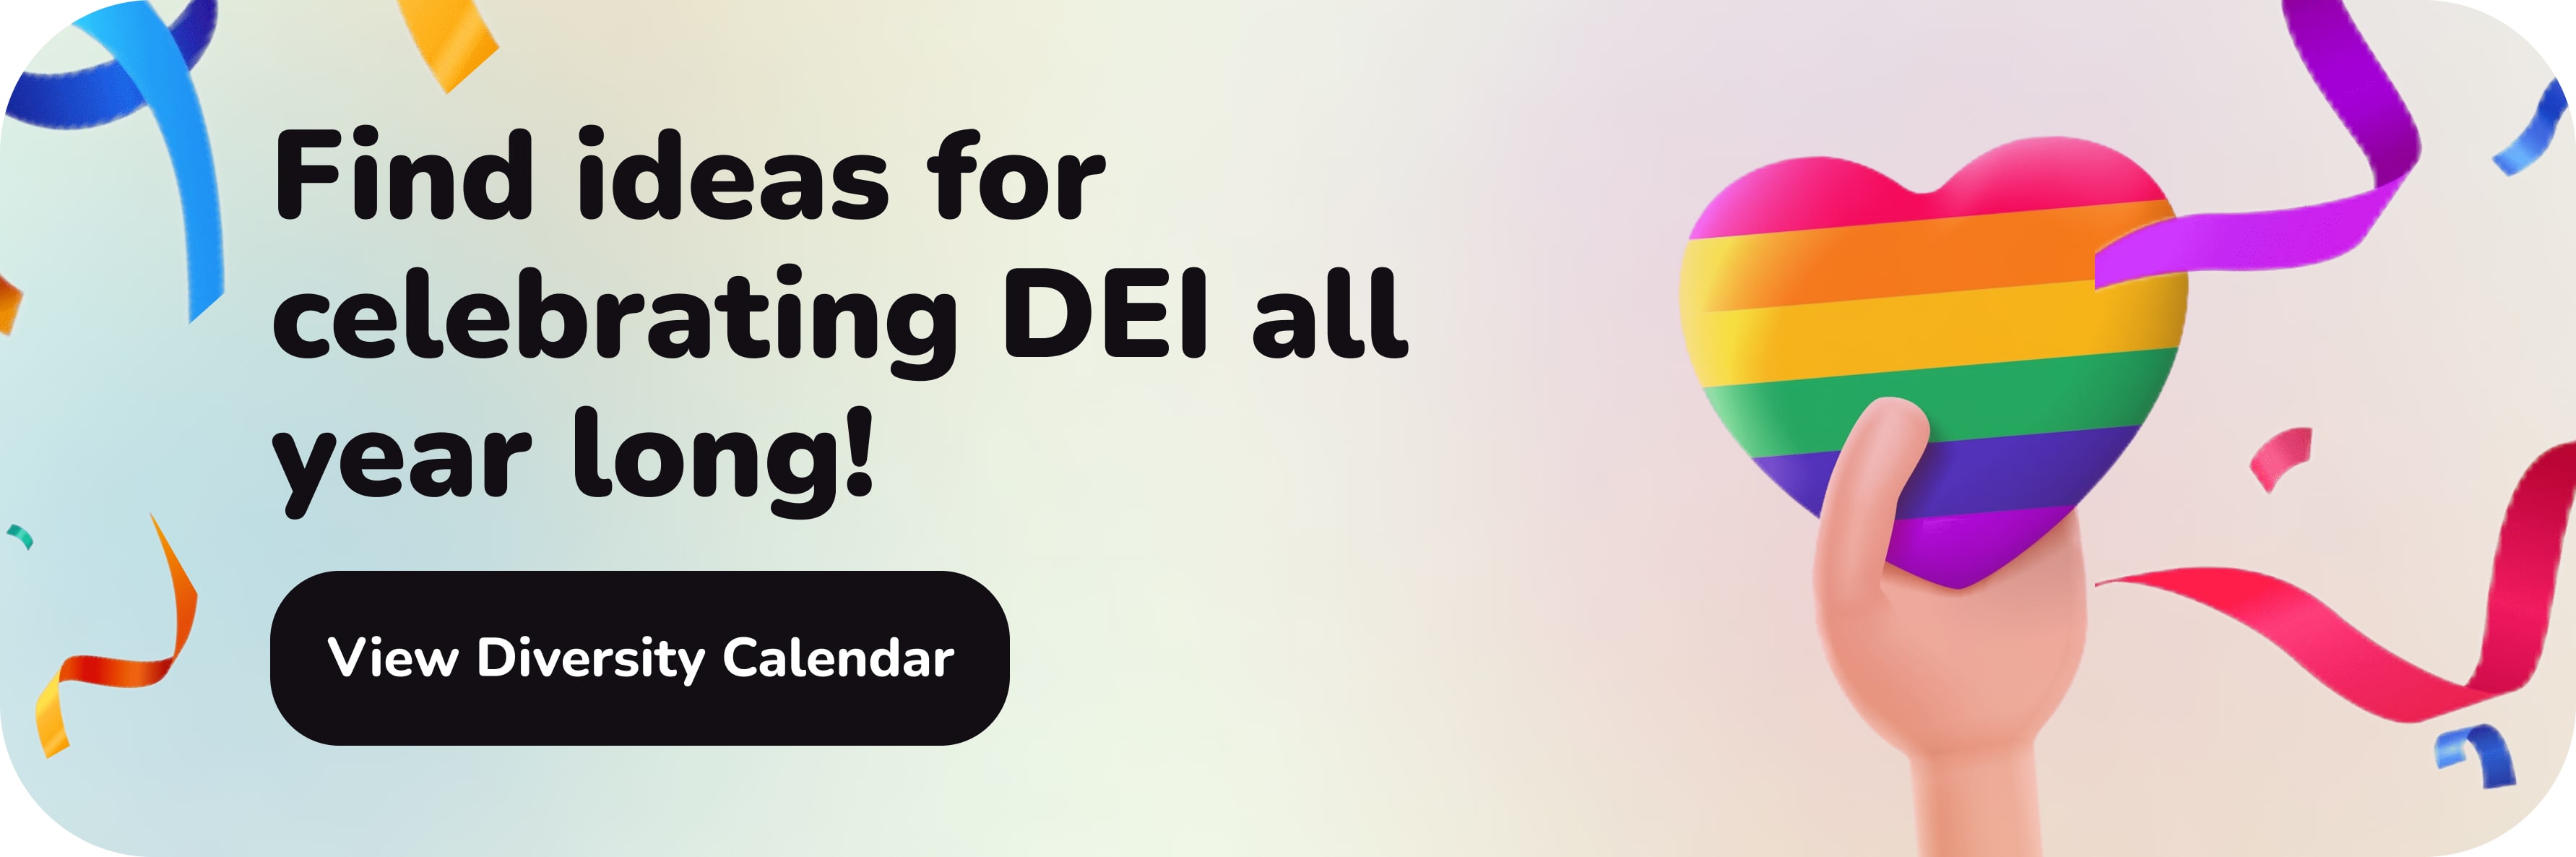 Find ideas for celebrating DEI all year long!